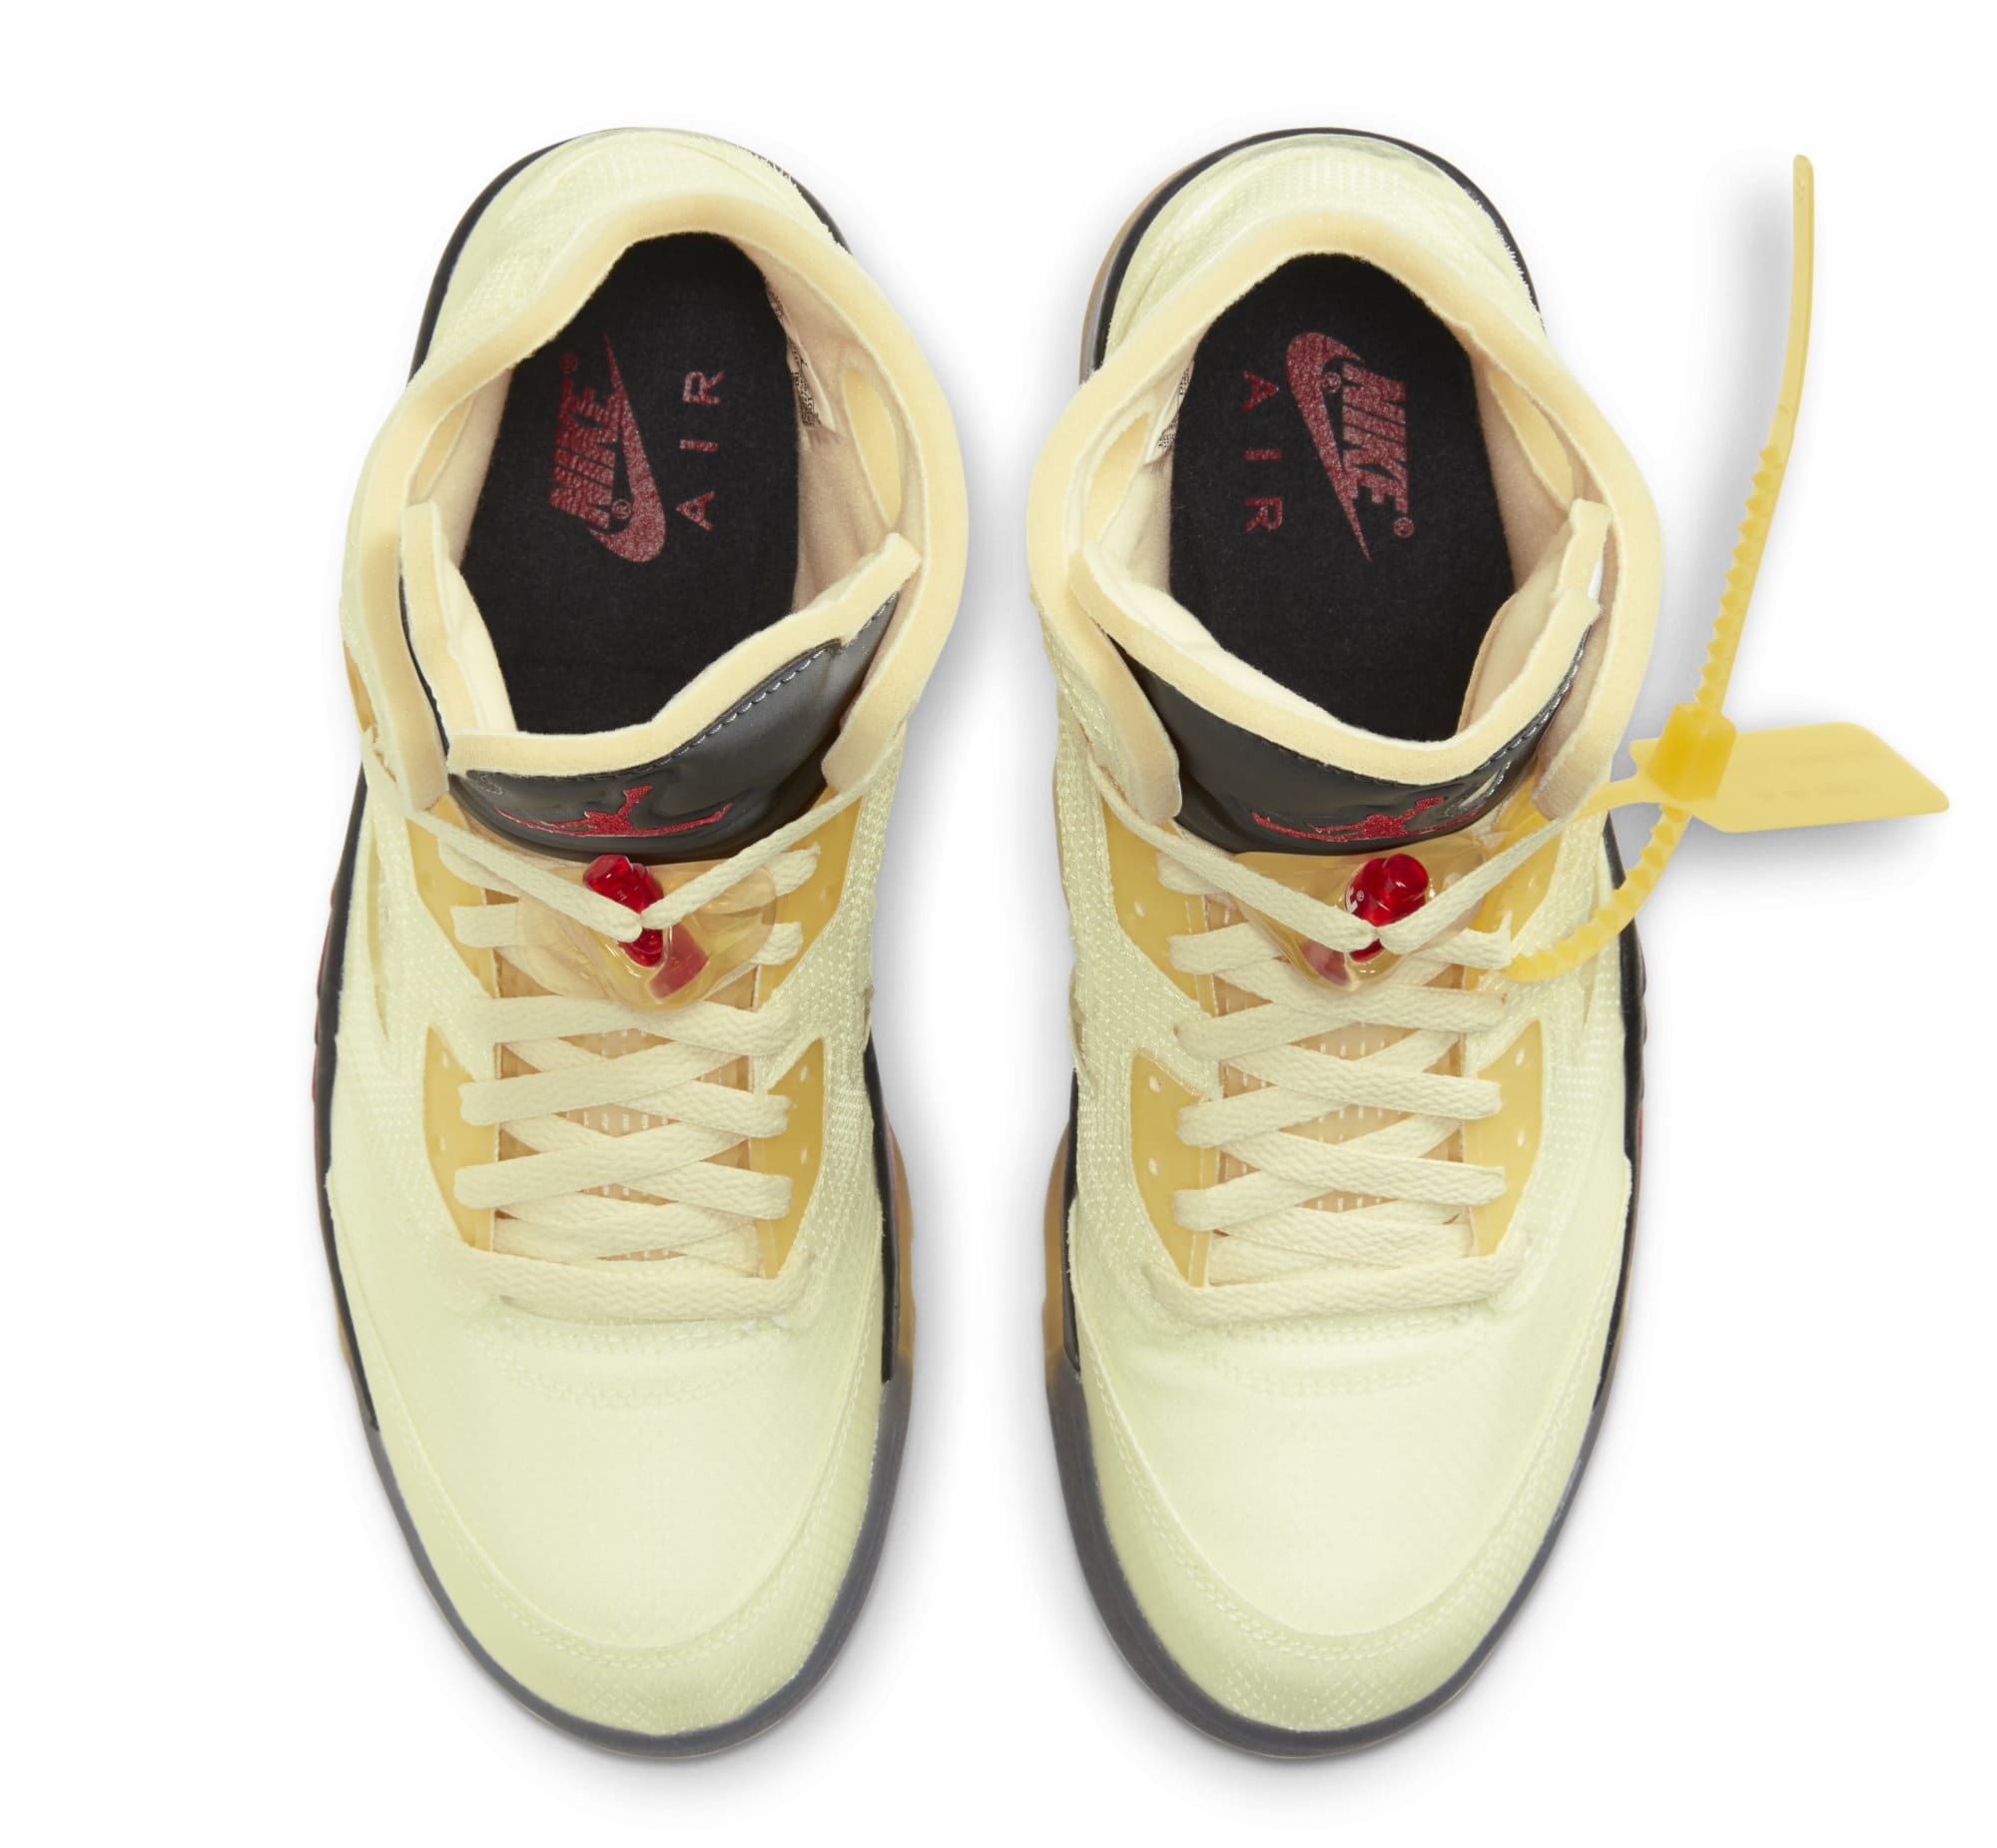 Take A Look At The Off-White x Air Jordan 5 “Fire Red” – TIP SOLVER